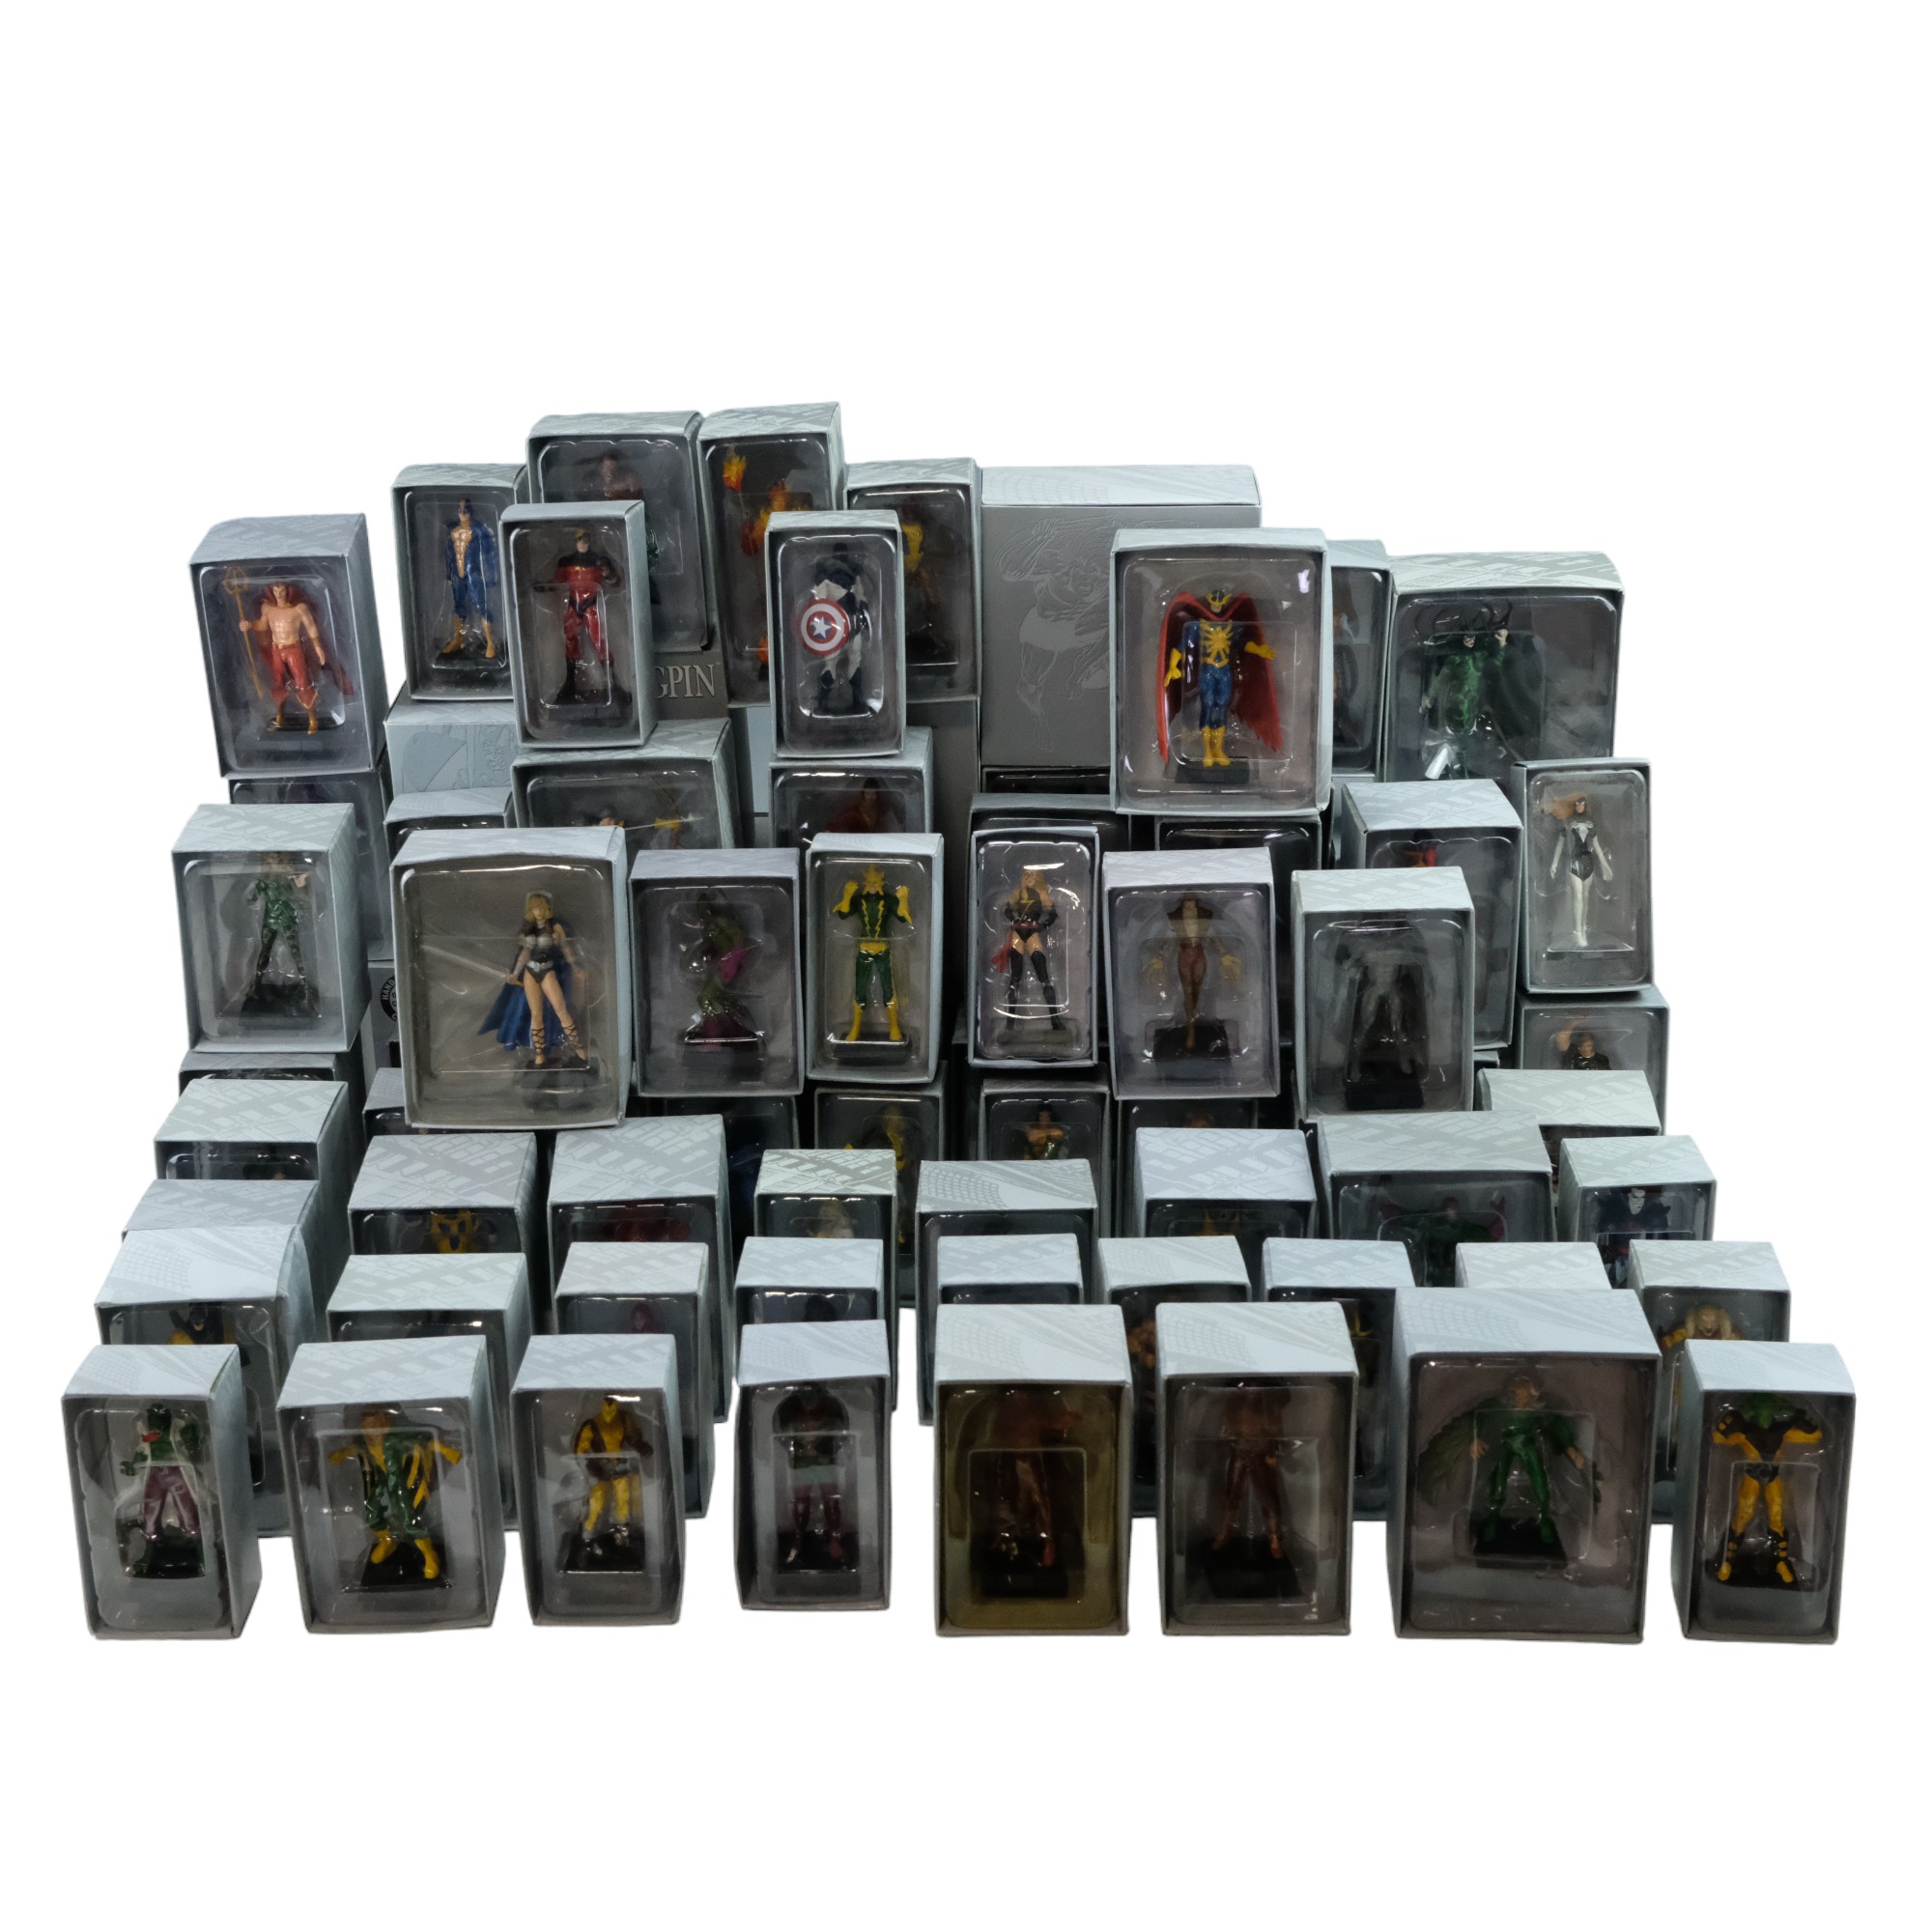 "The Classic Marvel Figurine Collection", a complete set of 200 figurines and magazines by Eaglemoss - Image 11 of 15